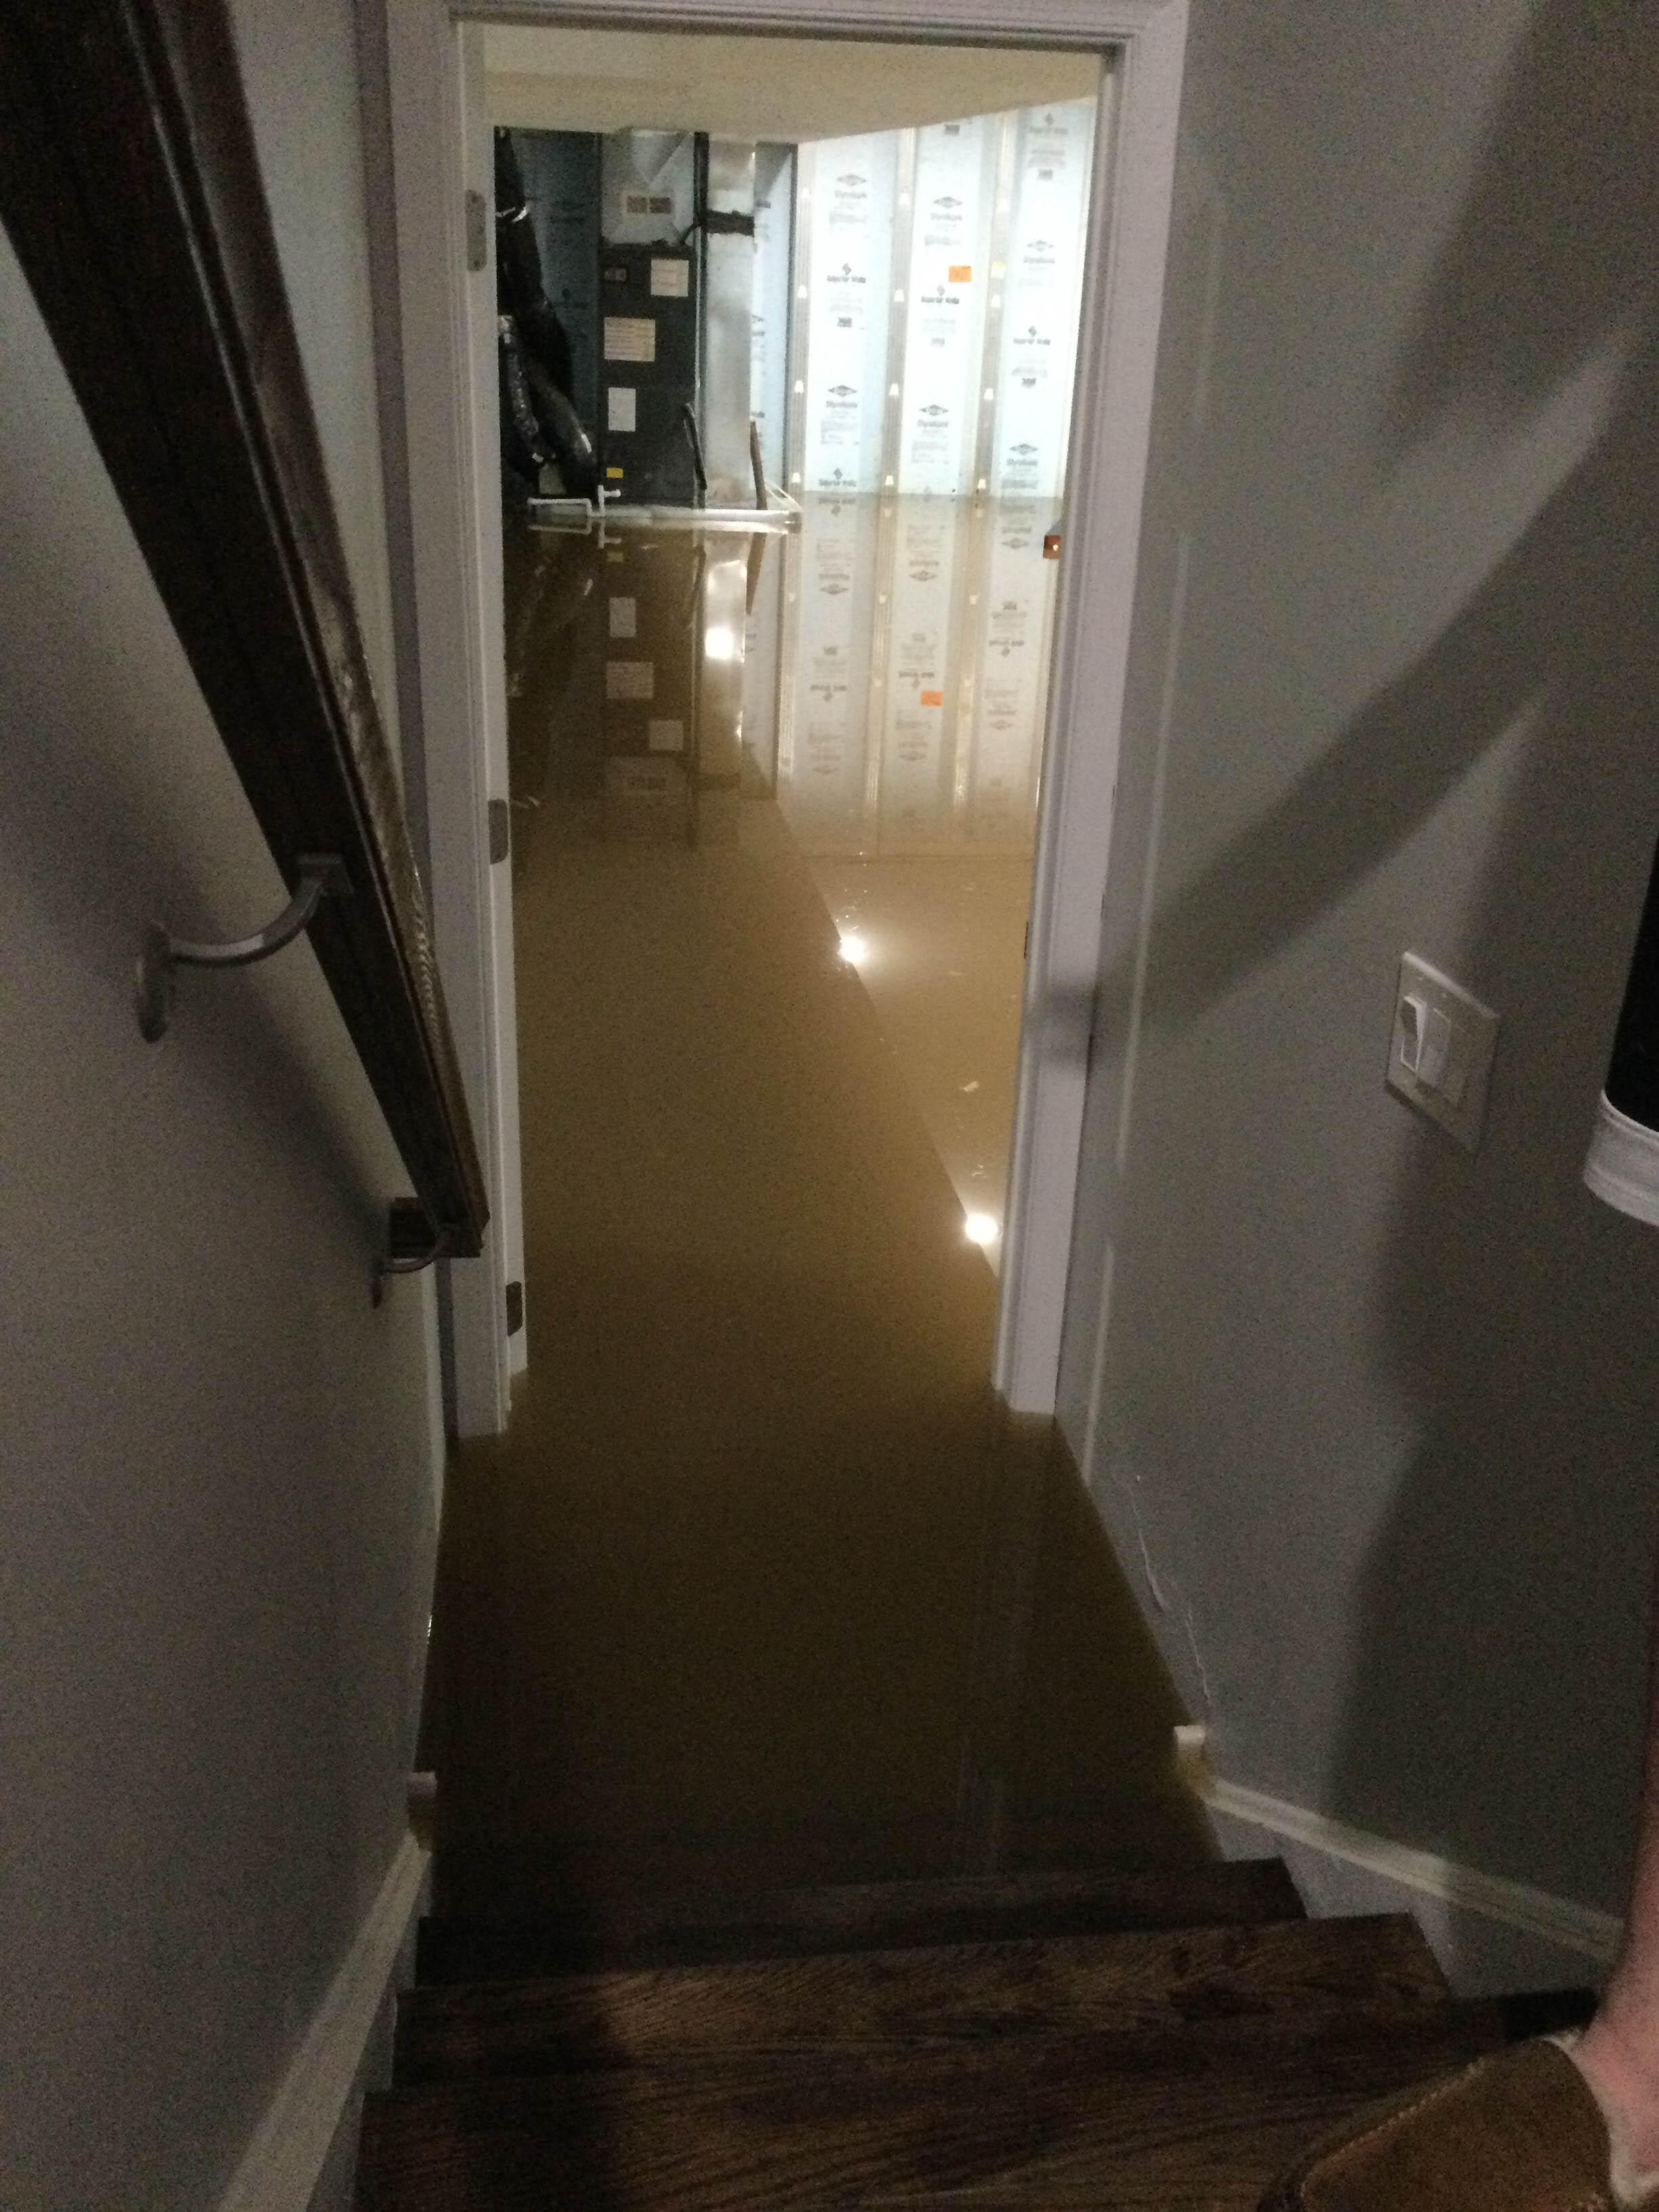 This family opened the door to their basement and were surprised to find standing water. They called SERVPRO of Langhorne/Bensalem who responded immediately to begin water restoration.